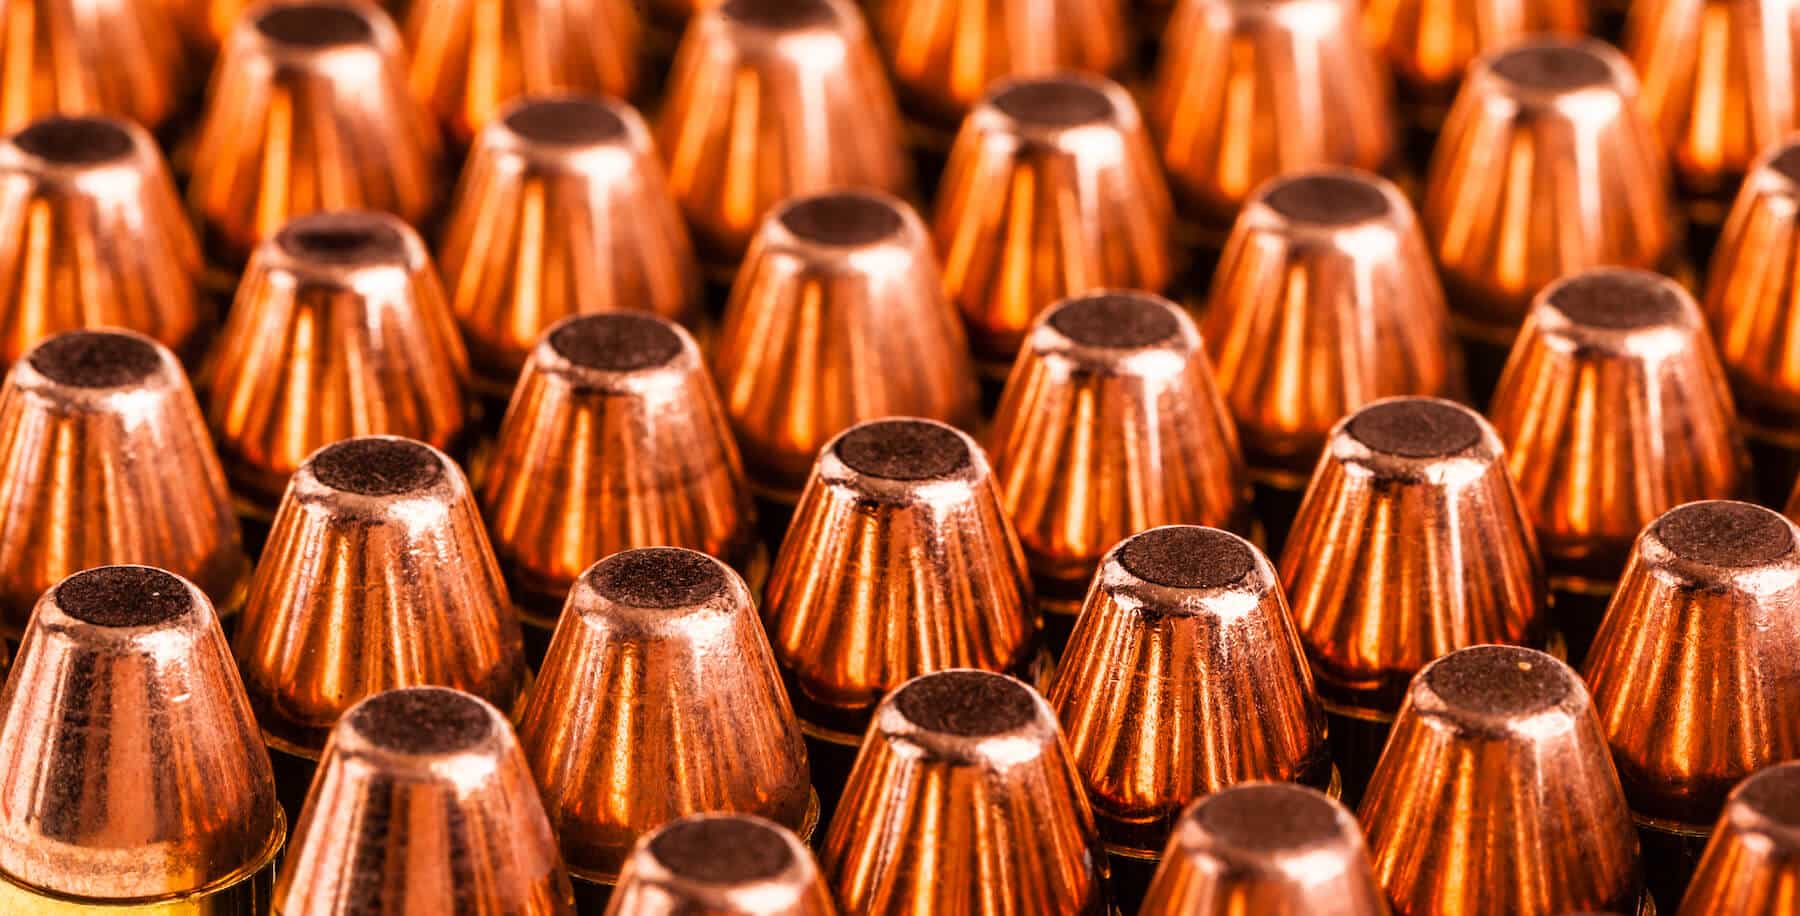 The Best 45 ACP Ammo For Self Defense, The Range, & More